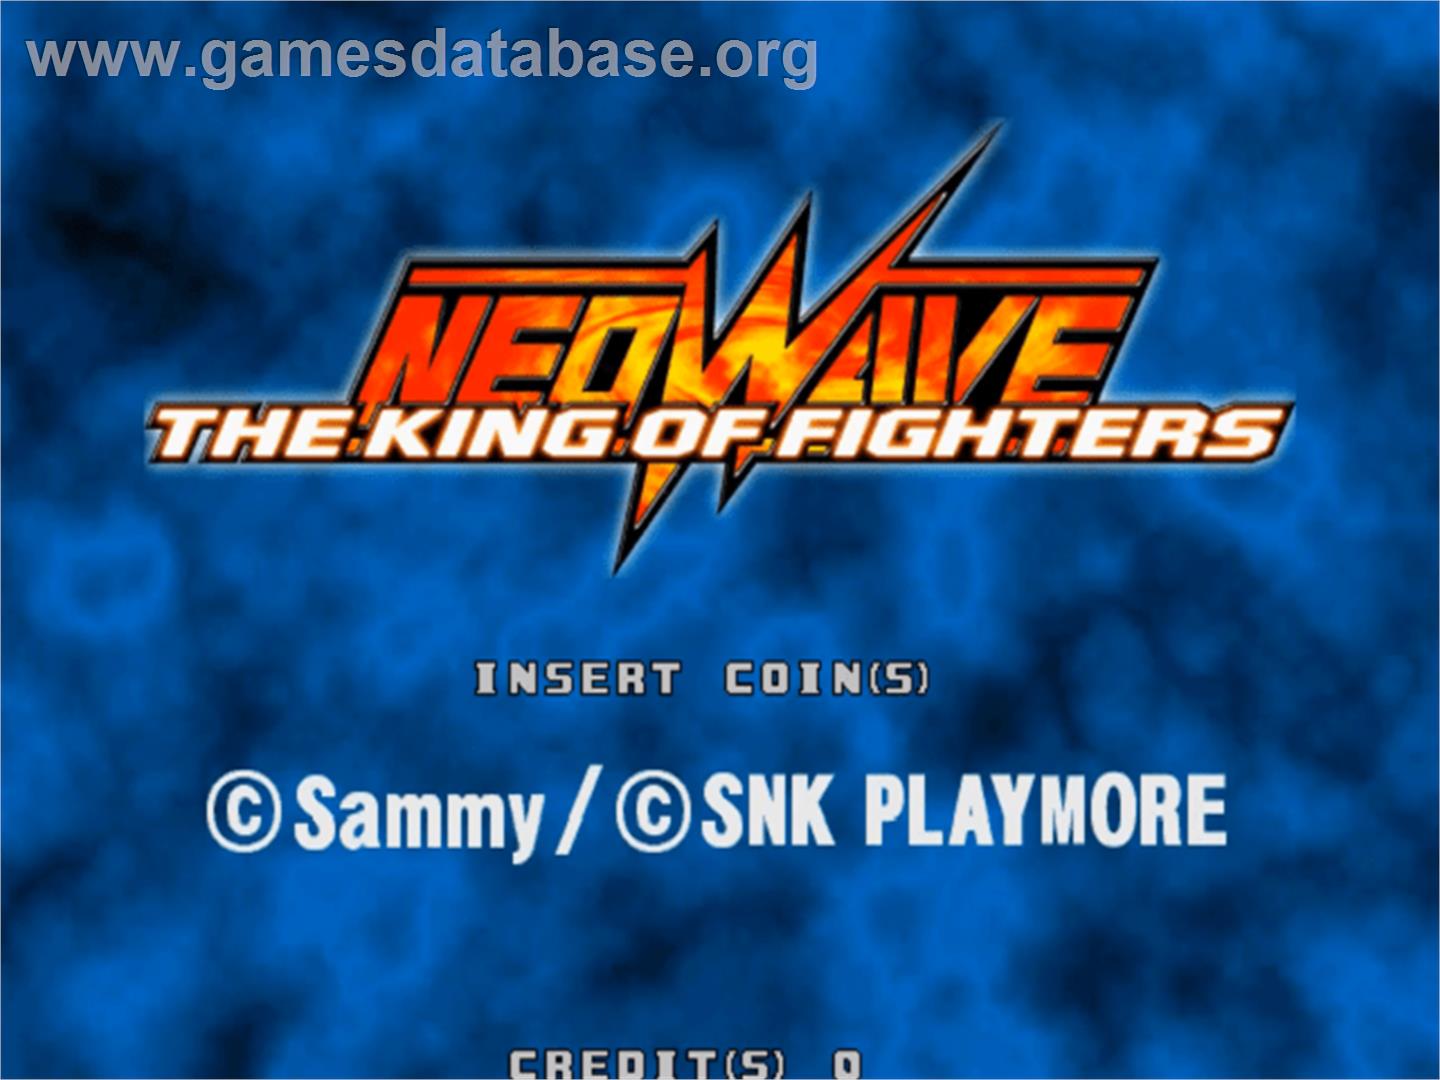 The King of Fighters Neowave - Sammy Atomiswave - Artwork - Title Screen